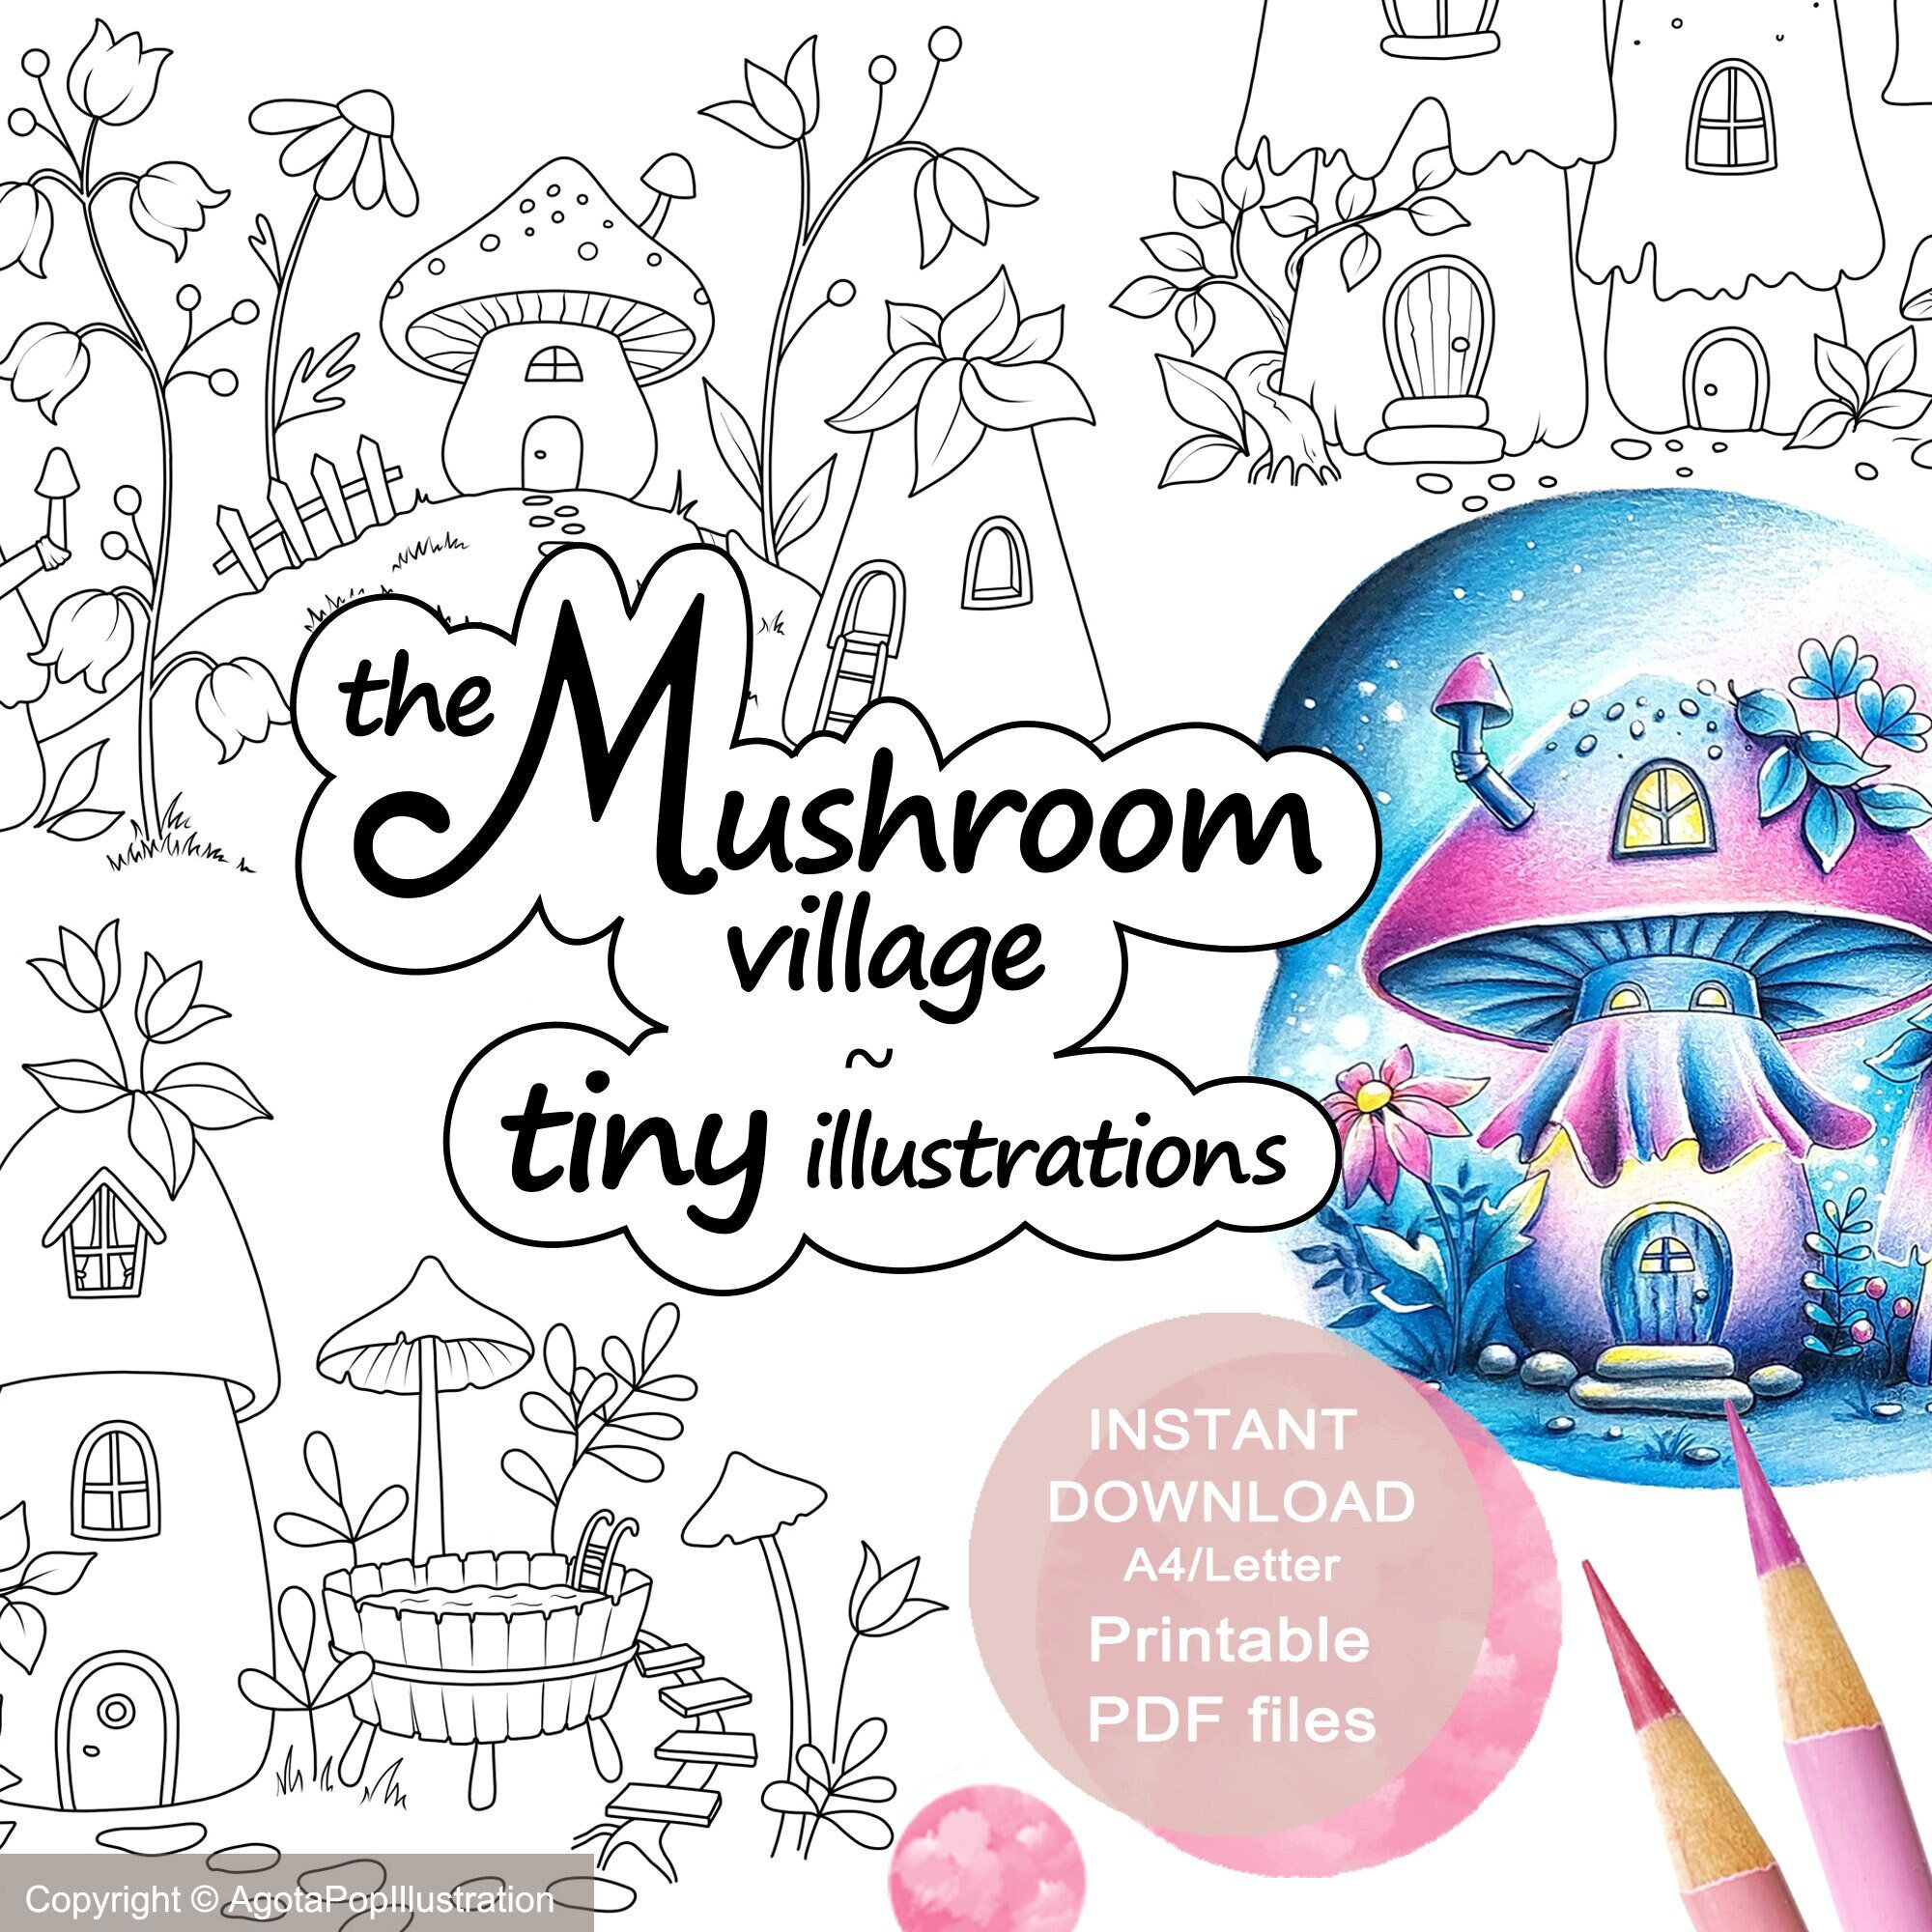 The mushroom village tiny illustrations colouring page set for adults tiny illustrations printable pdf instant download